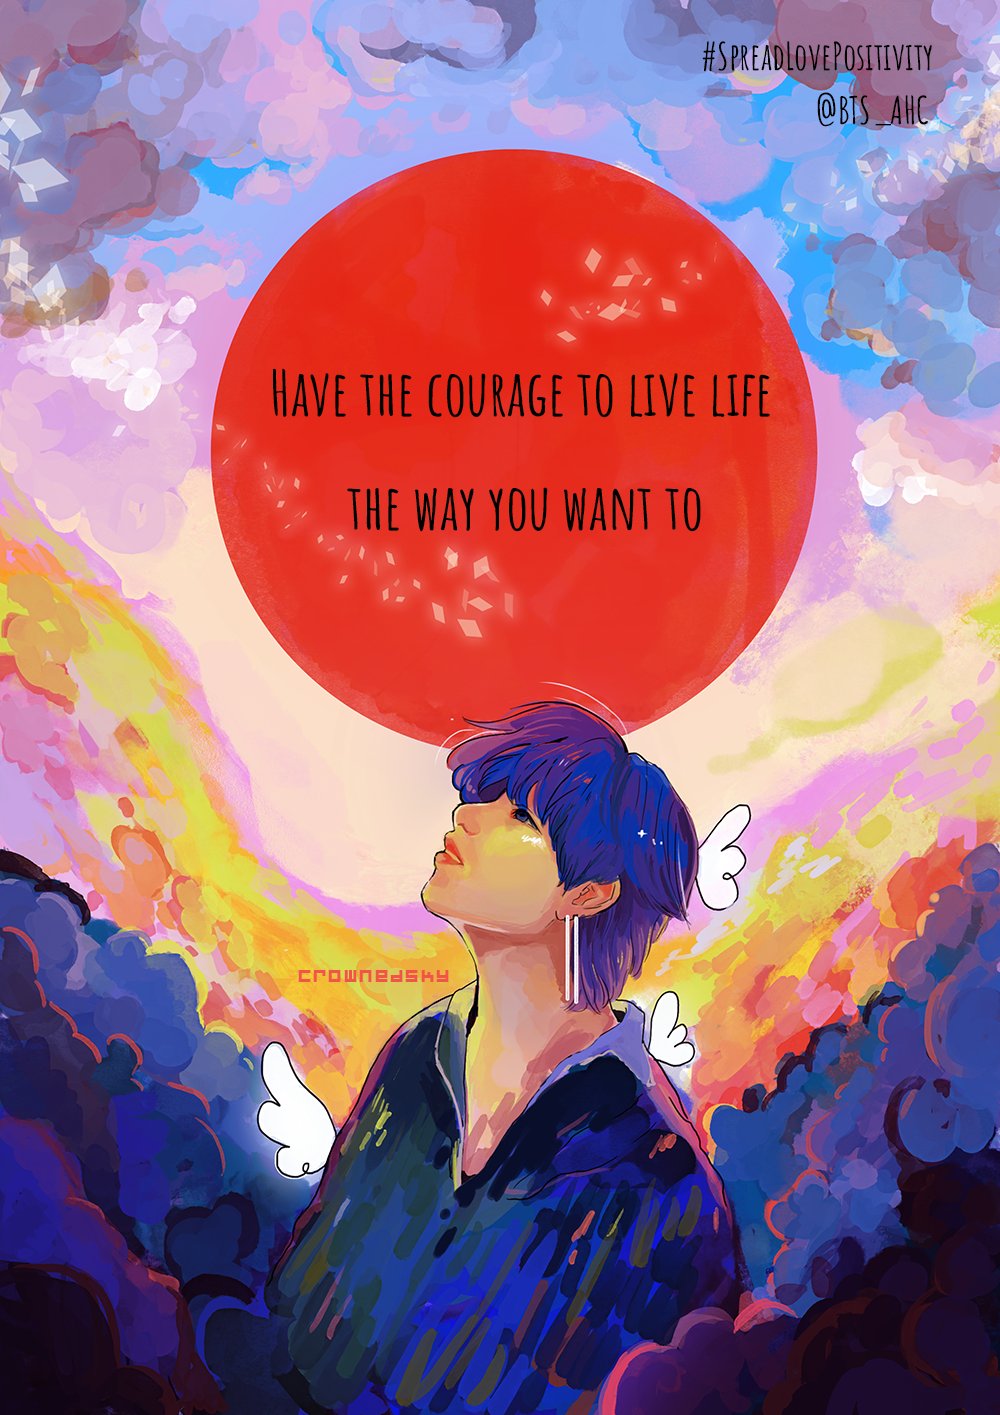 Bts Armyhelpcenter Slow Have The Courage To Live Life The Way You Want To Credit Crownedsky Bts Ahc Spreadlovepositivity Bts Twt